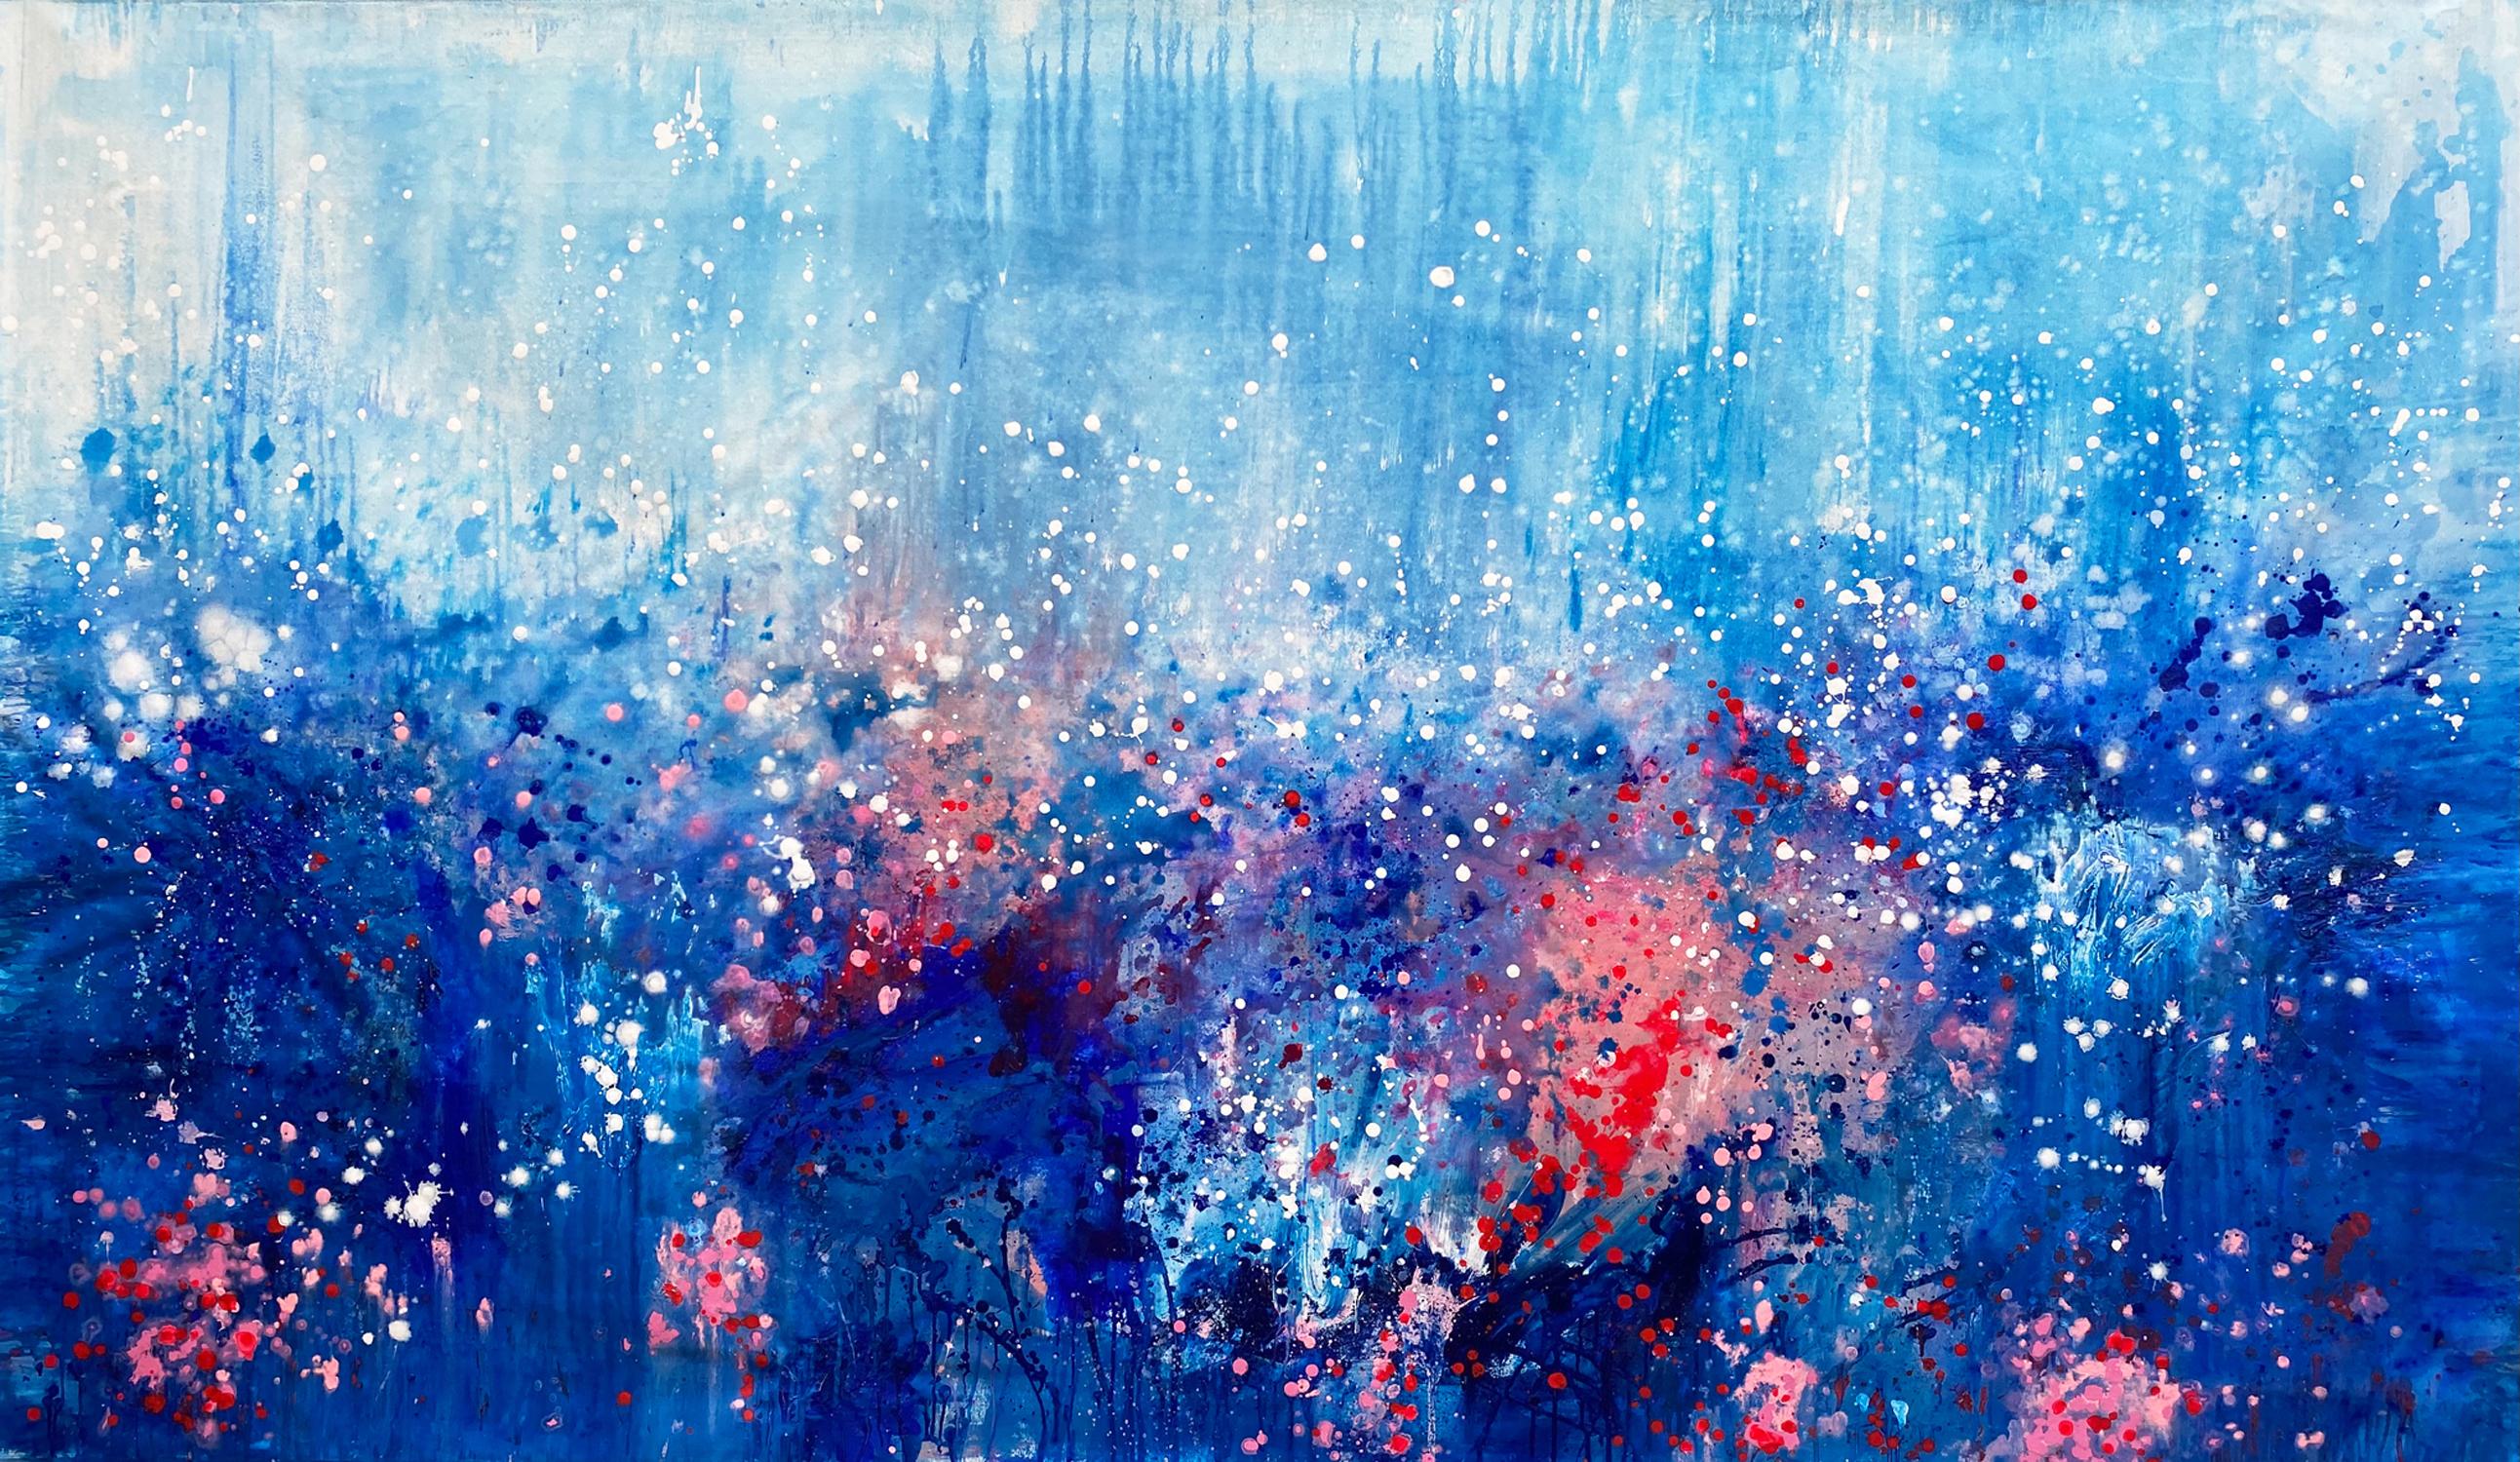 Kathleen Rhee Abstract Painting - Falling Joy large statement art abstract painting blue pink red blue coral 